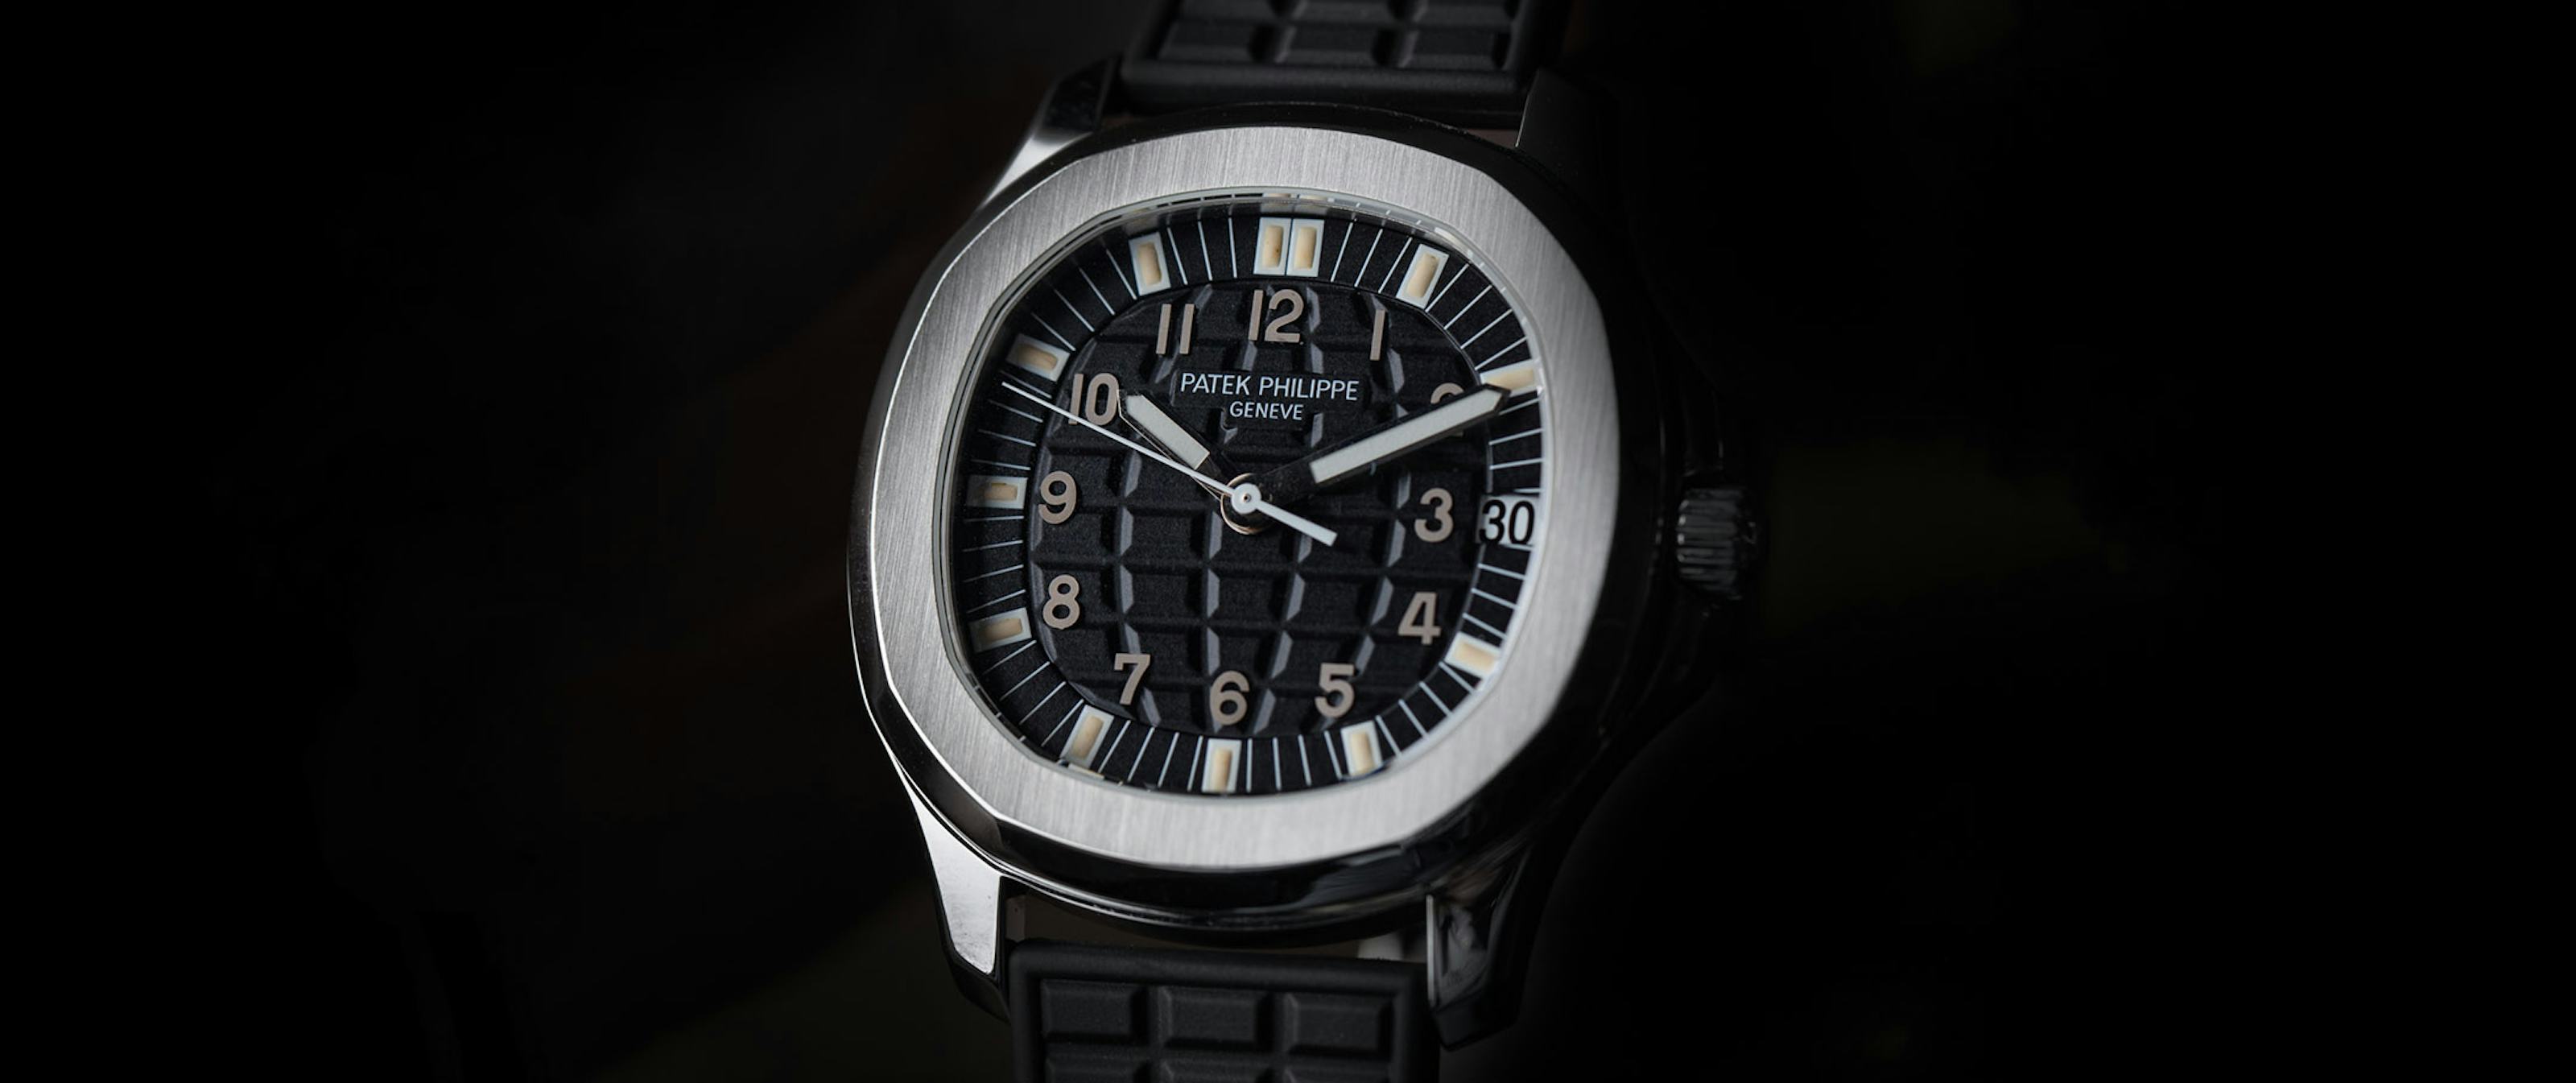 Drip or Drown? An Overview of the Patek Philippe Aquanaut